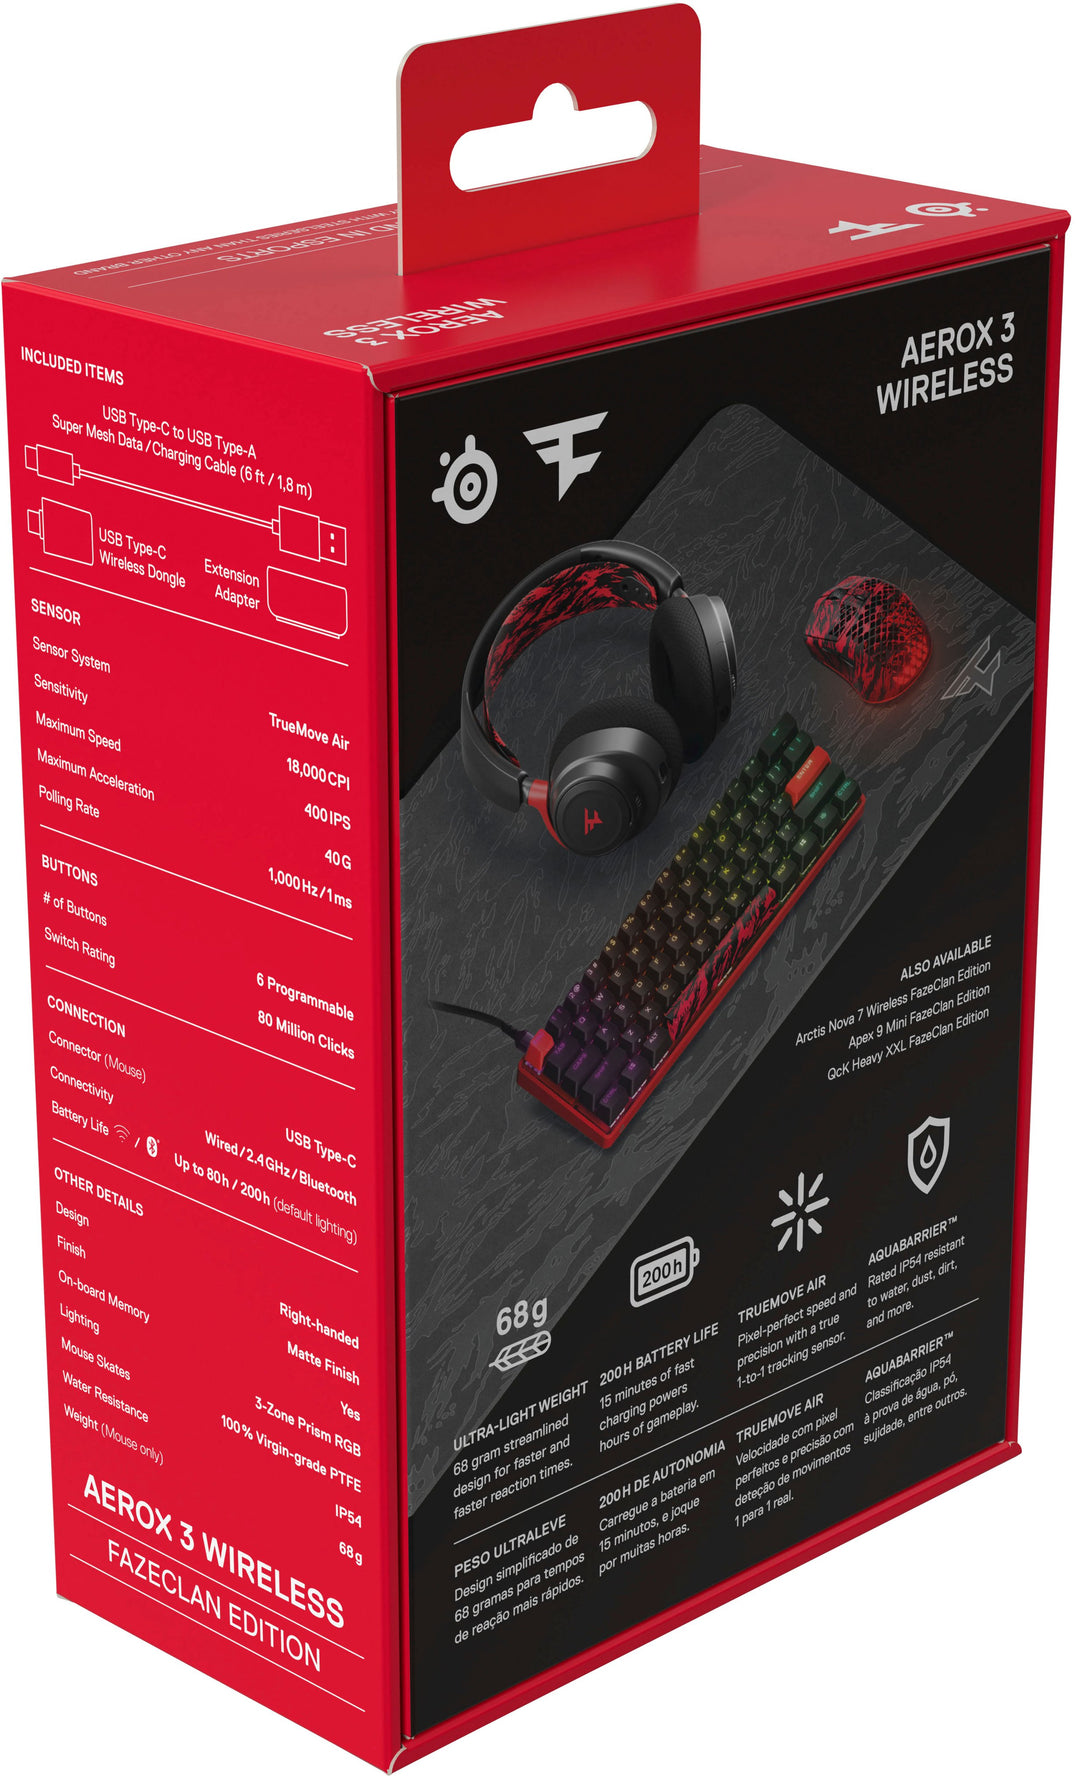 SteelSeries - Aerox 3 Super Light Honeycomb Wireless RGB Optical Gaming Mouse - FaZe Clan Limited Edition_3